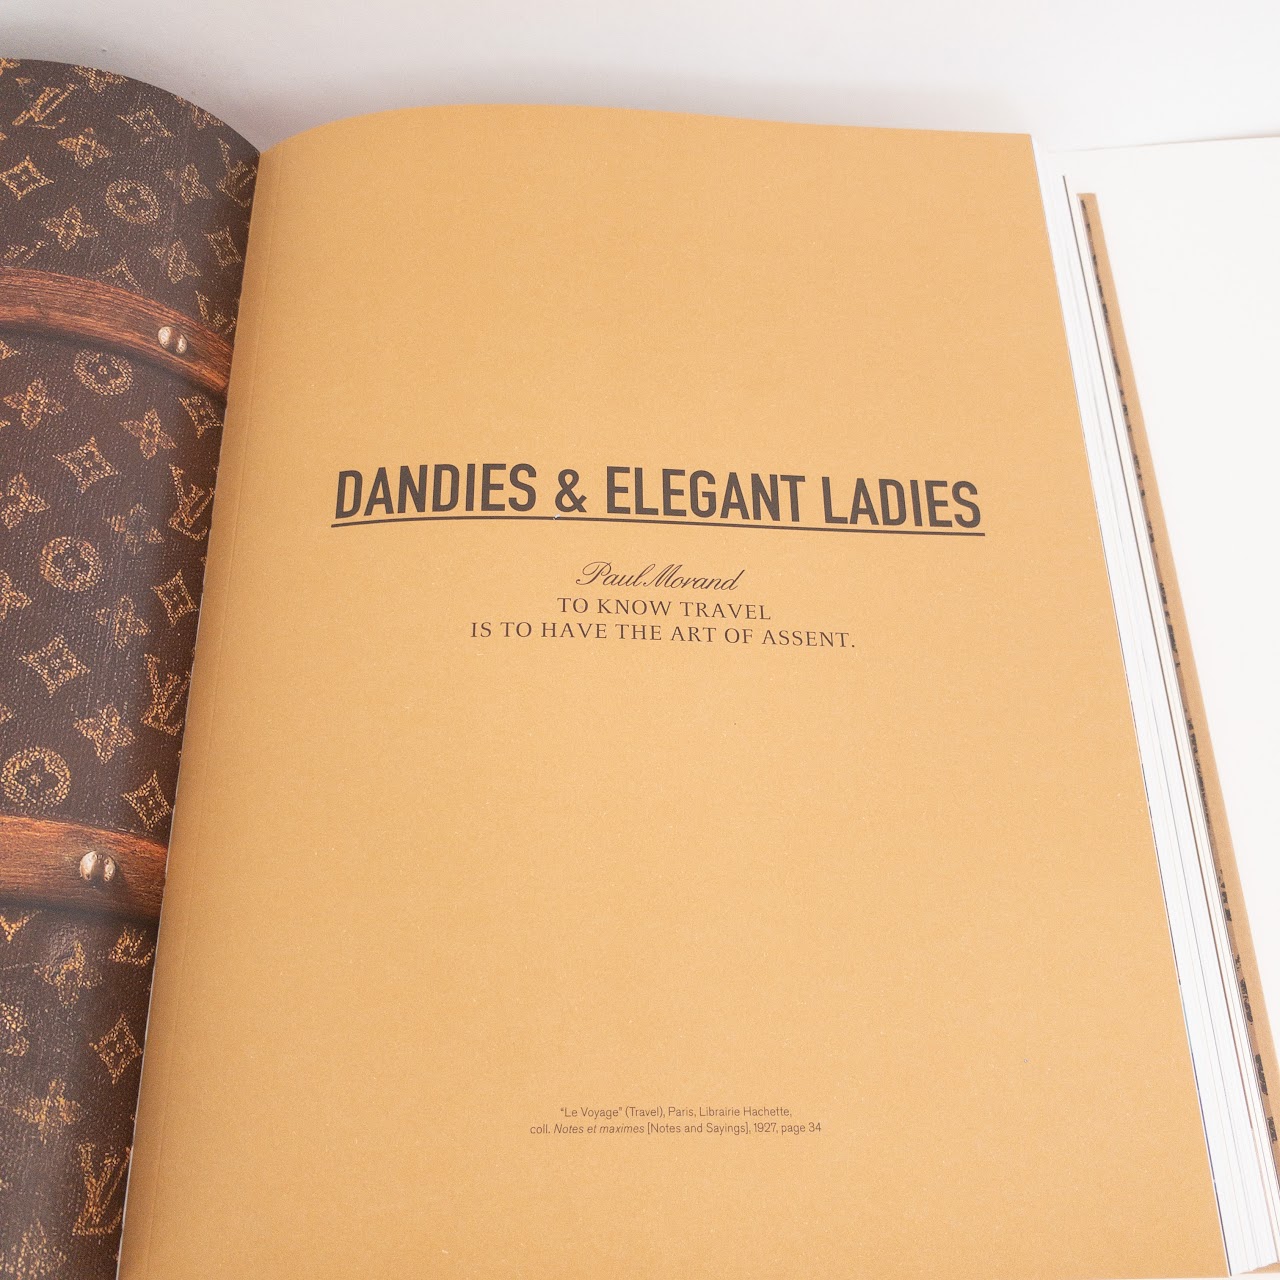 Louis+Vuitton+%3A+100+Legendary+Trunks+by+%C3%89ric+Pujalet-Pla%C3%A1+and+Pierre+L%C3%A9onforte+%282010%2C+Hardcover%29  for sale online